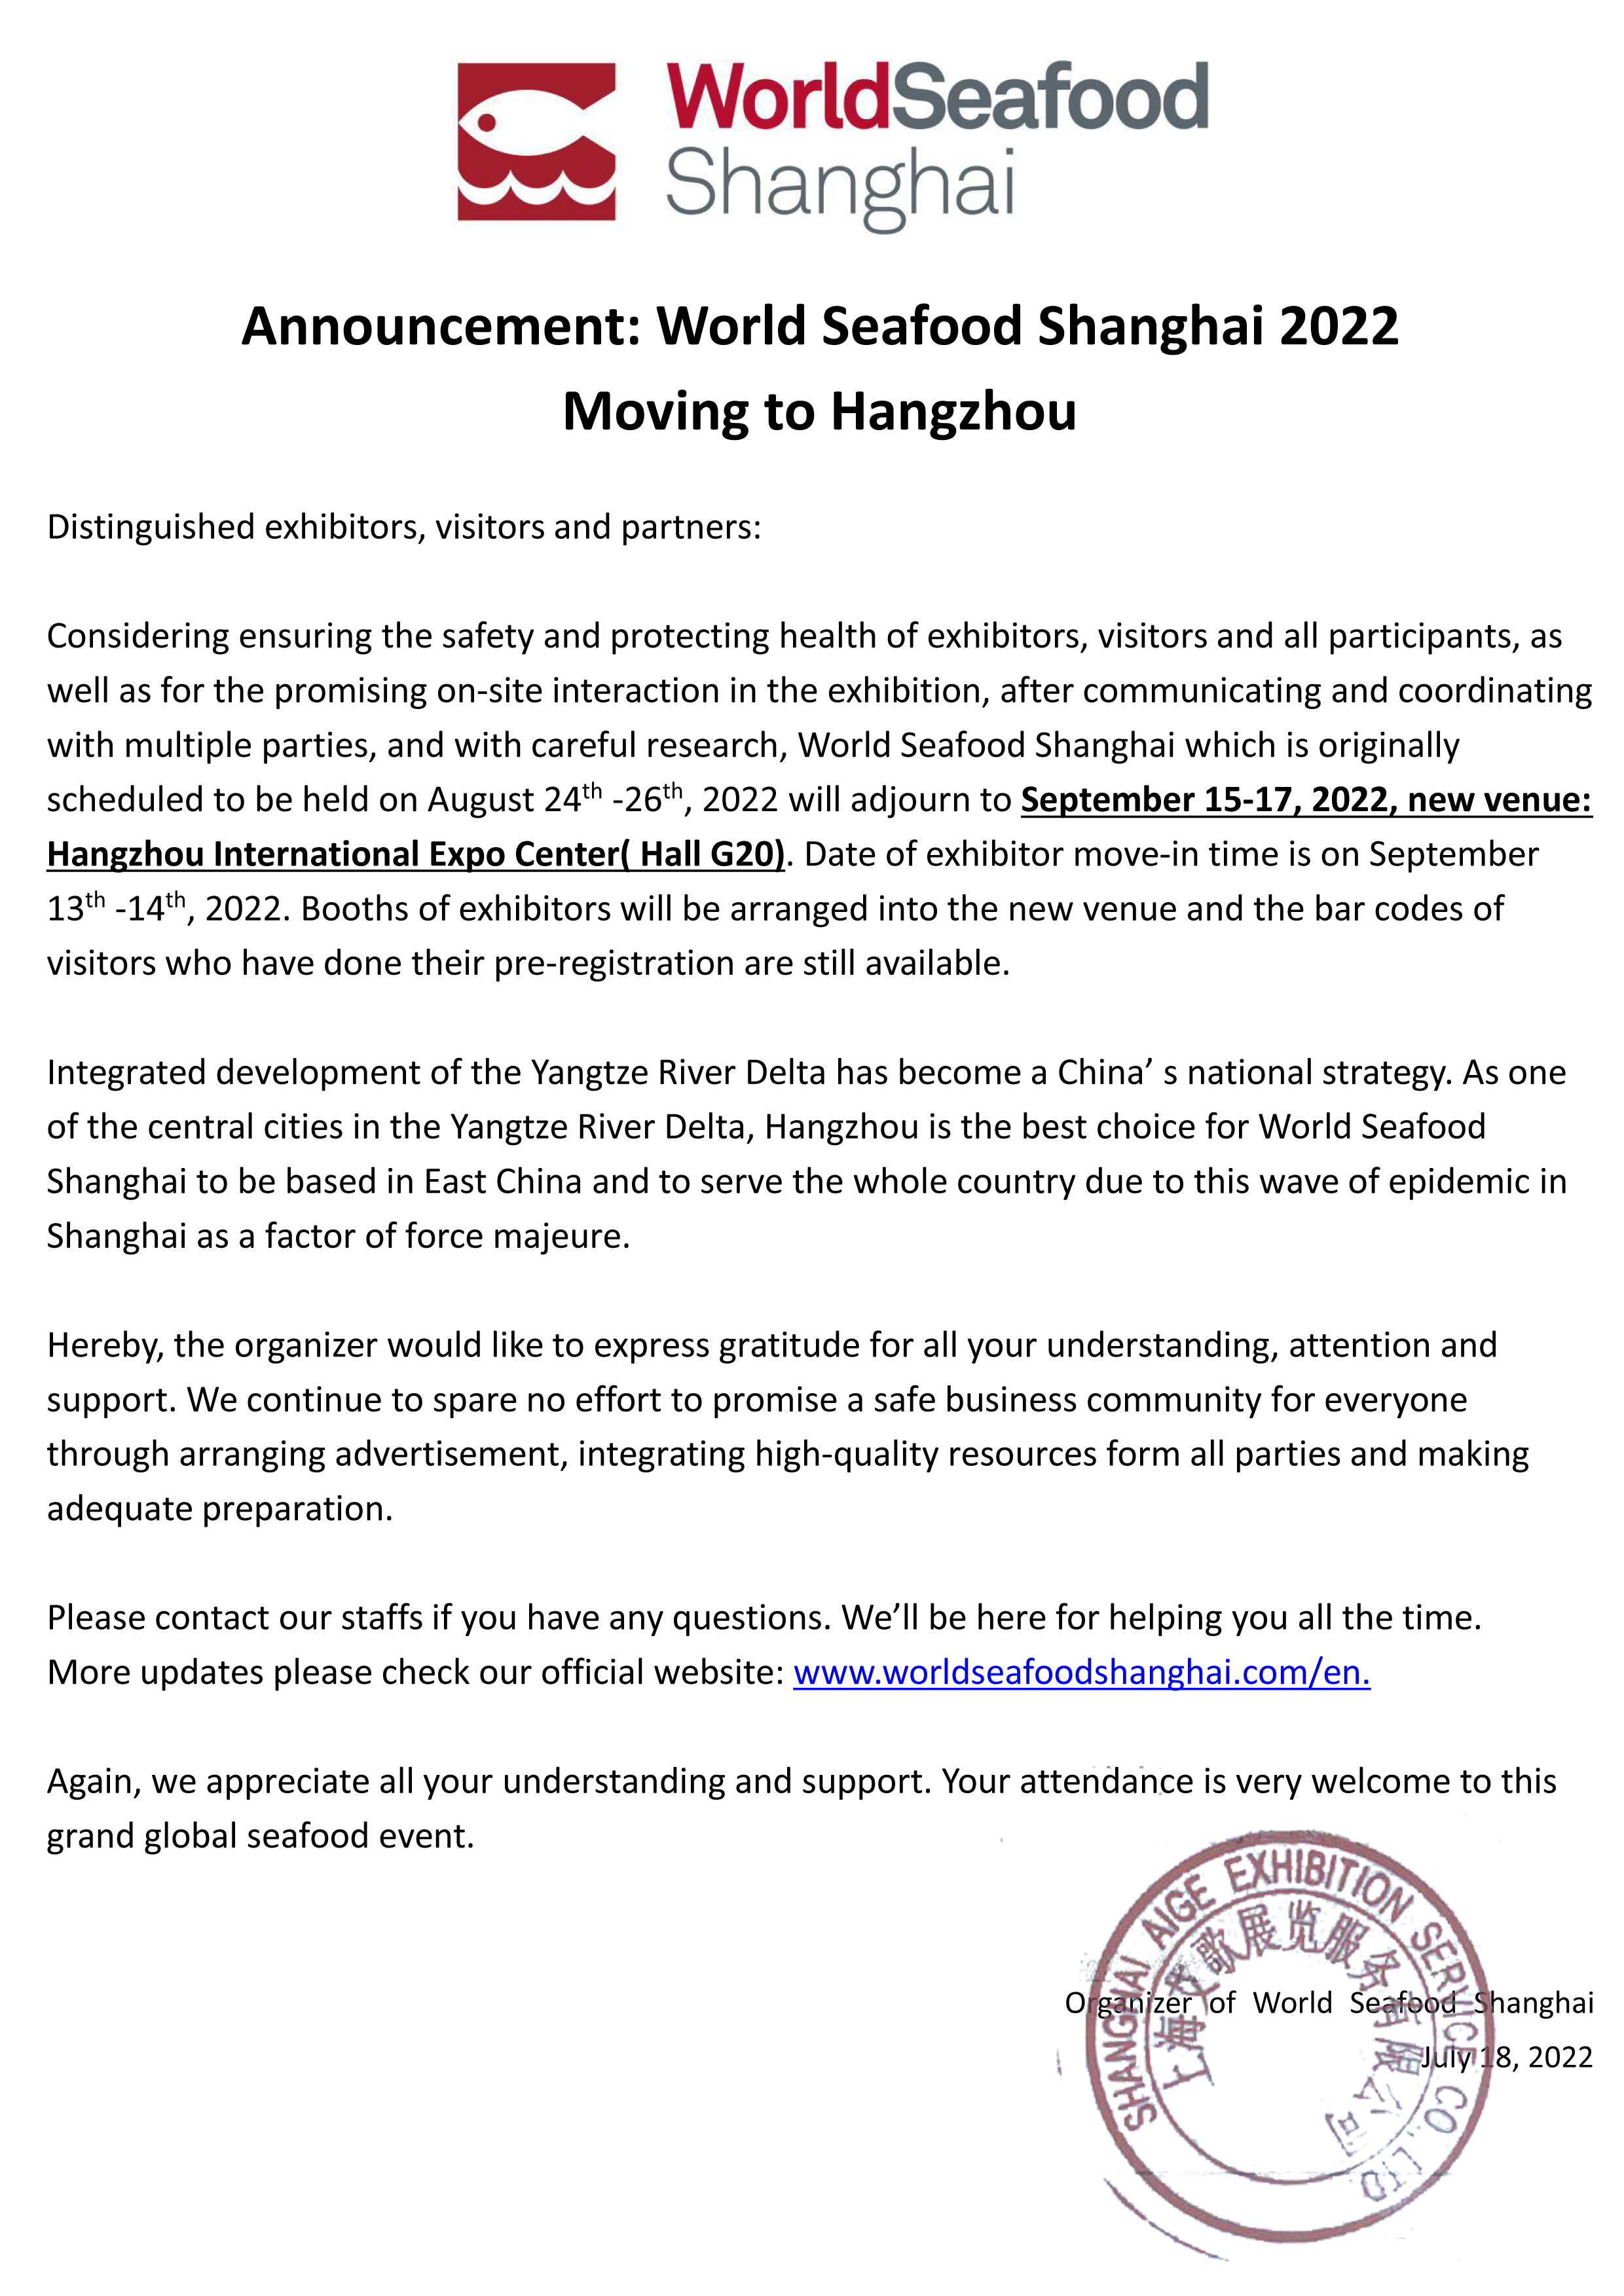 Announcement: World Seafood Shanghai 2022 Moving to Hangzhou(图1)